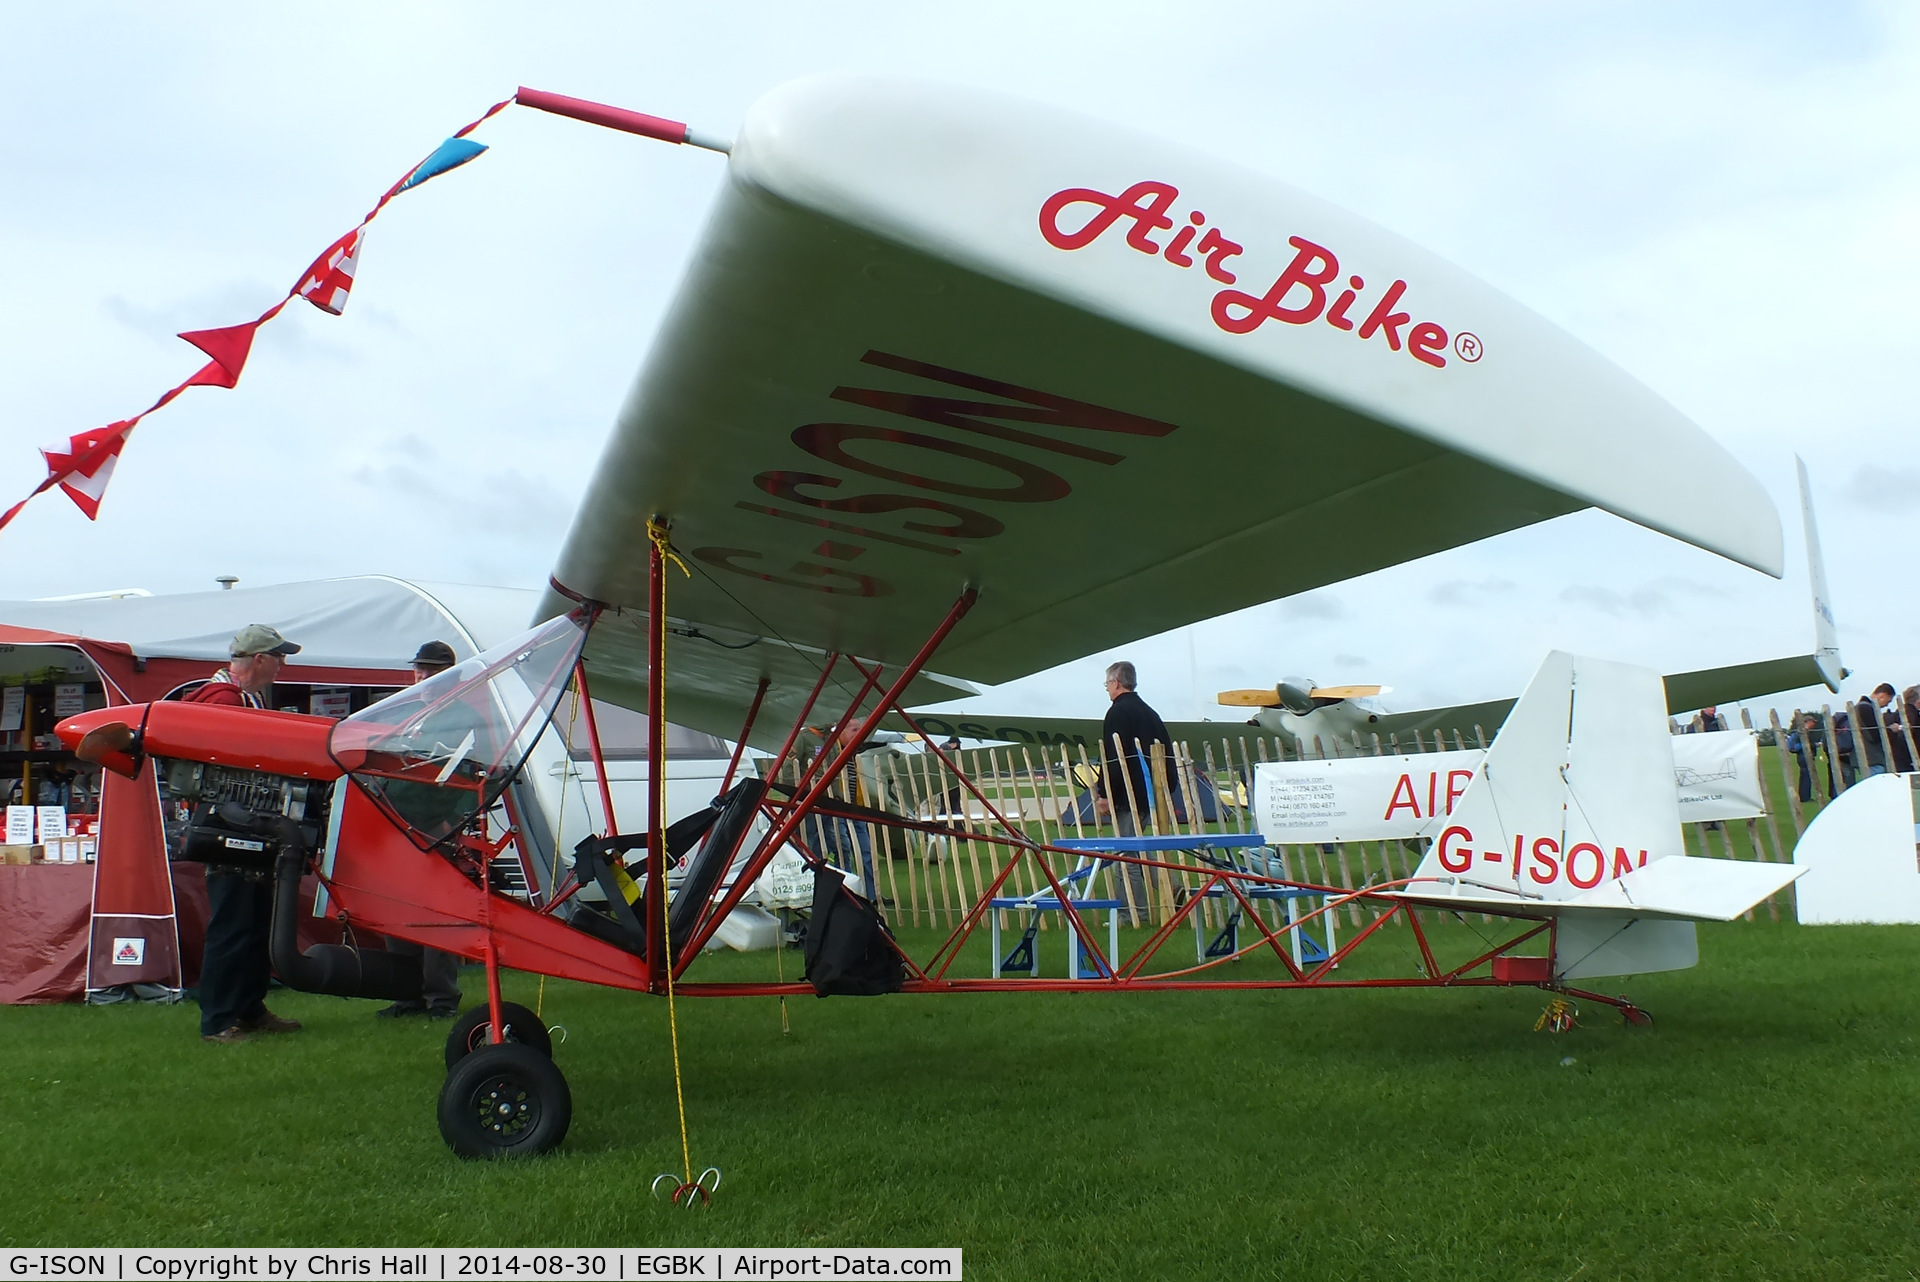 G-ISON, 2011 AirBikeUK Lite C/N 001, at the LAA Rally 2014, Sywell